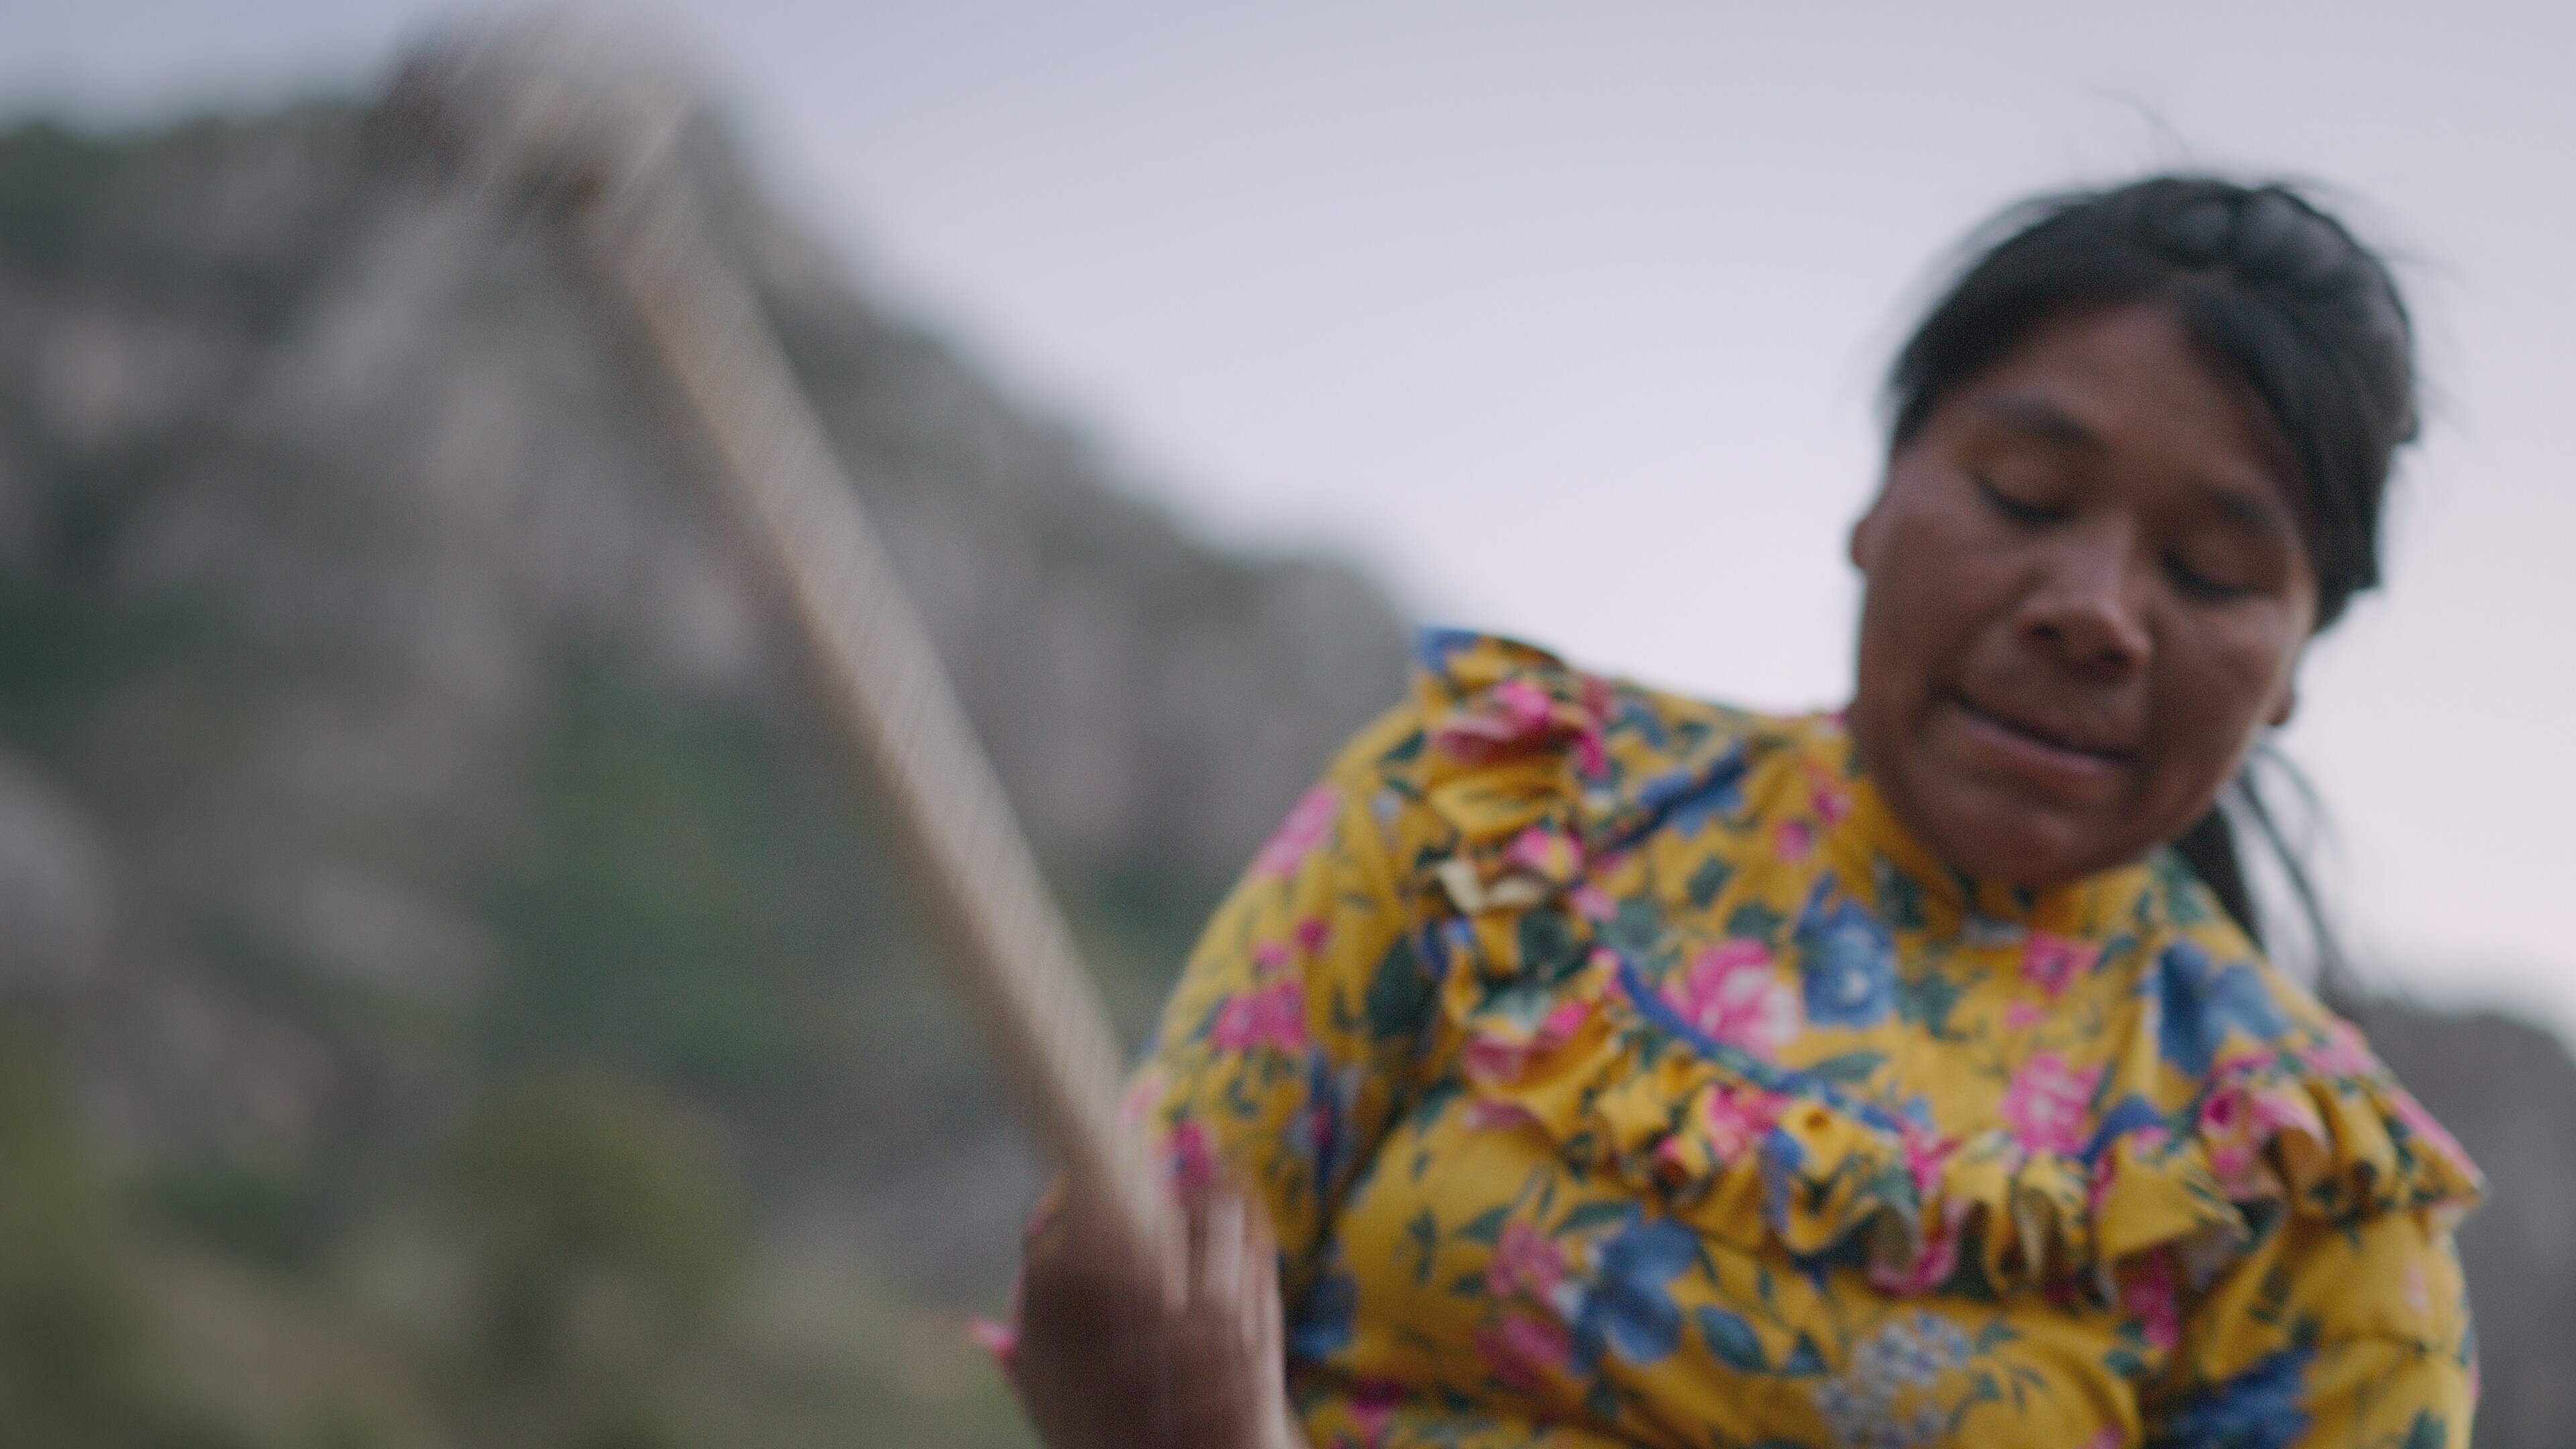 Catalina Motochi Nunez chops wood with an ax. (National Geographic for Disney+)